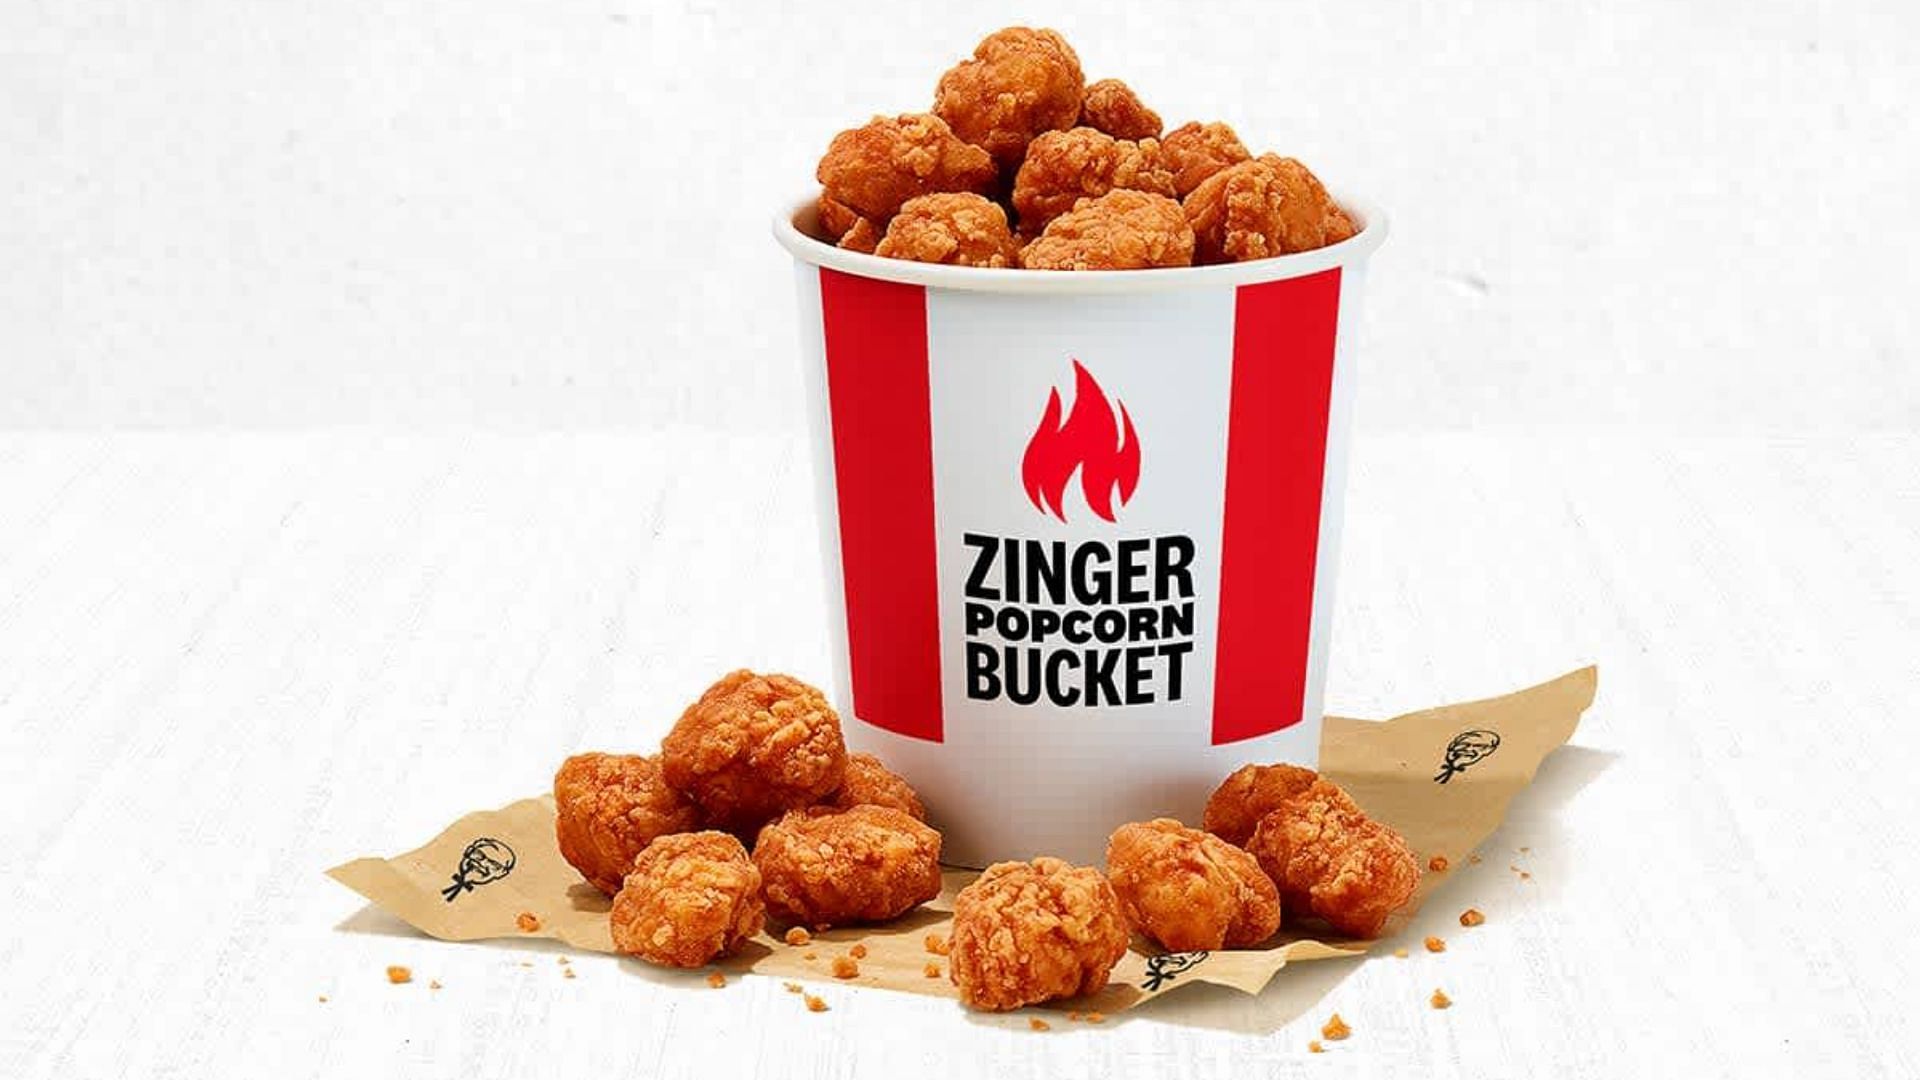 KFC&#039;s Popcorn chicken has been one of the most popular items on the chain&#039;s menu (Image via KFC)